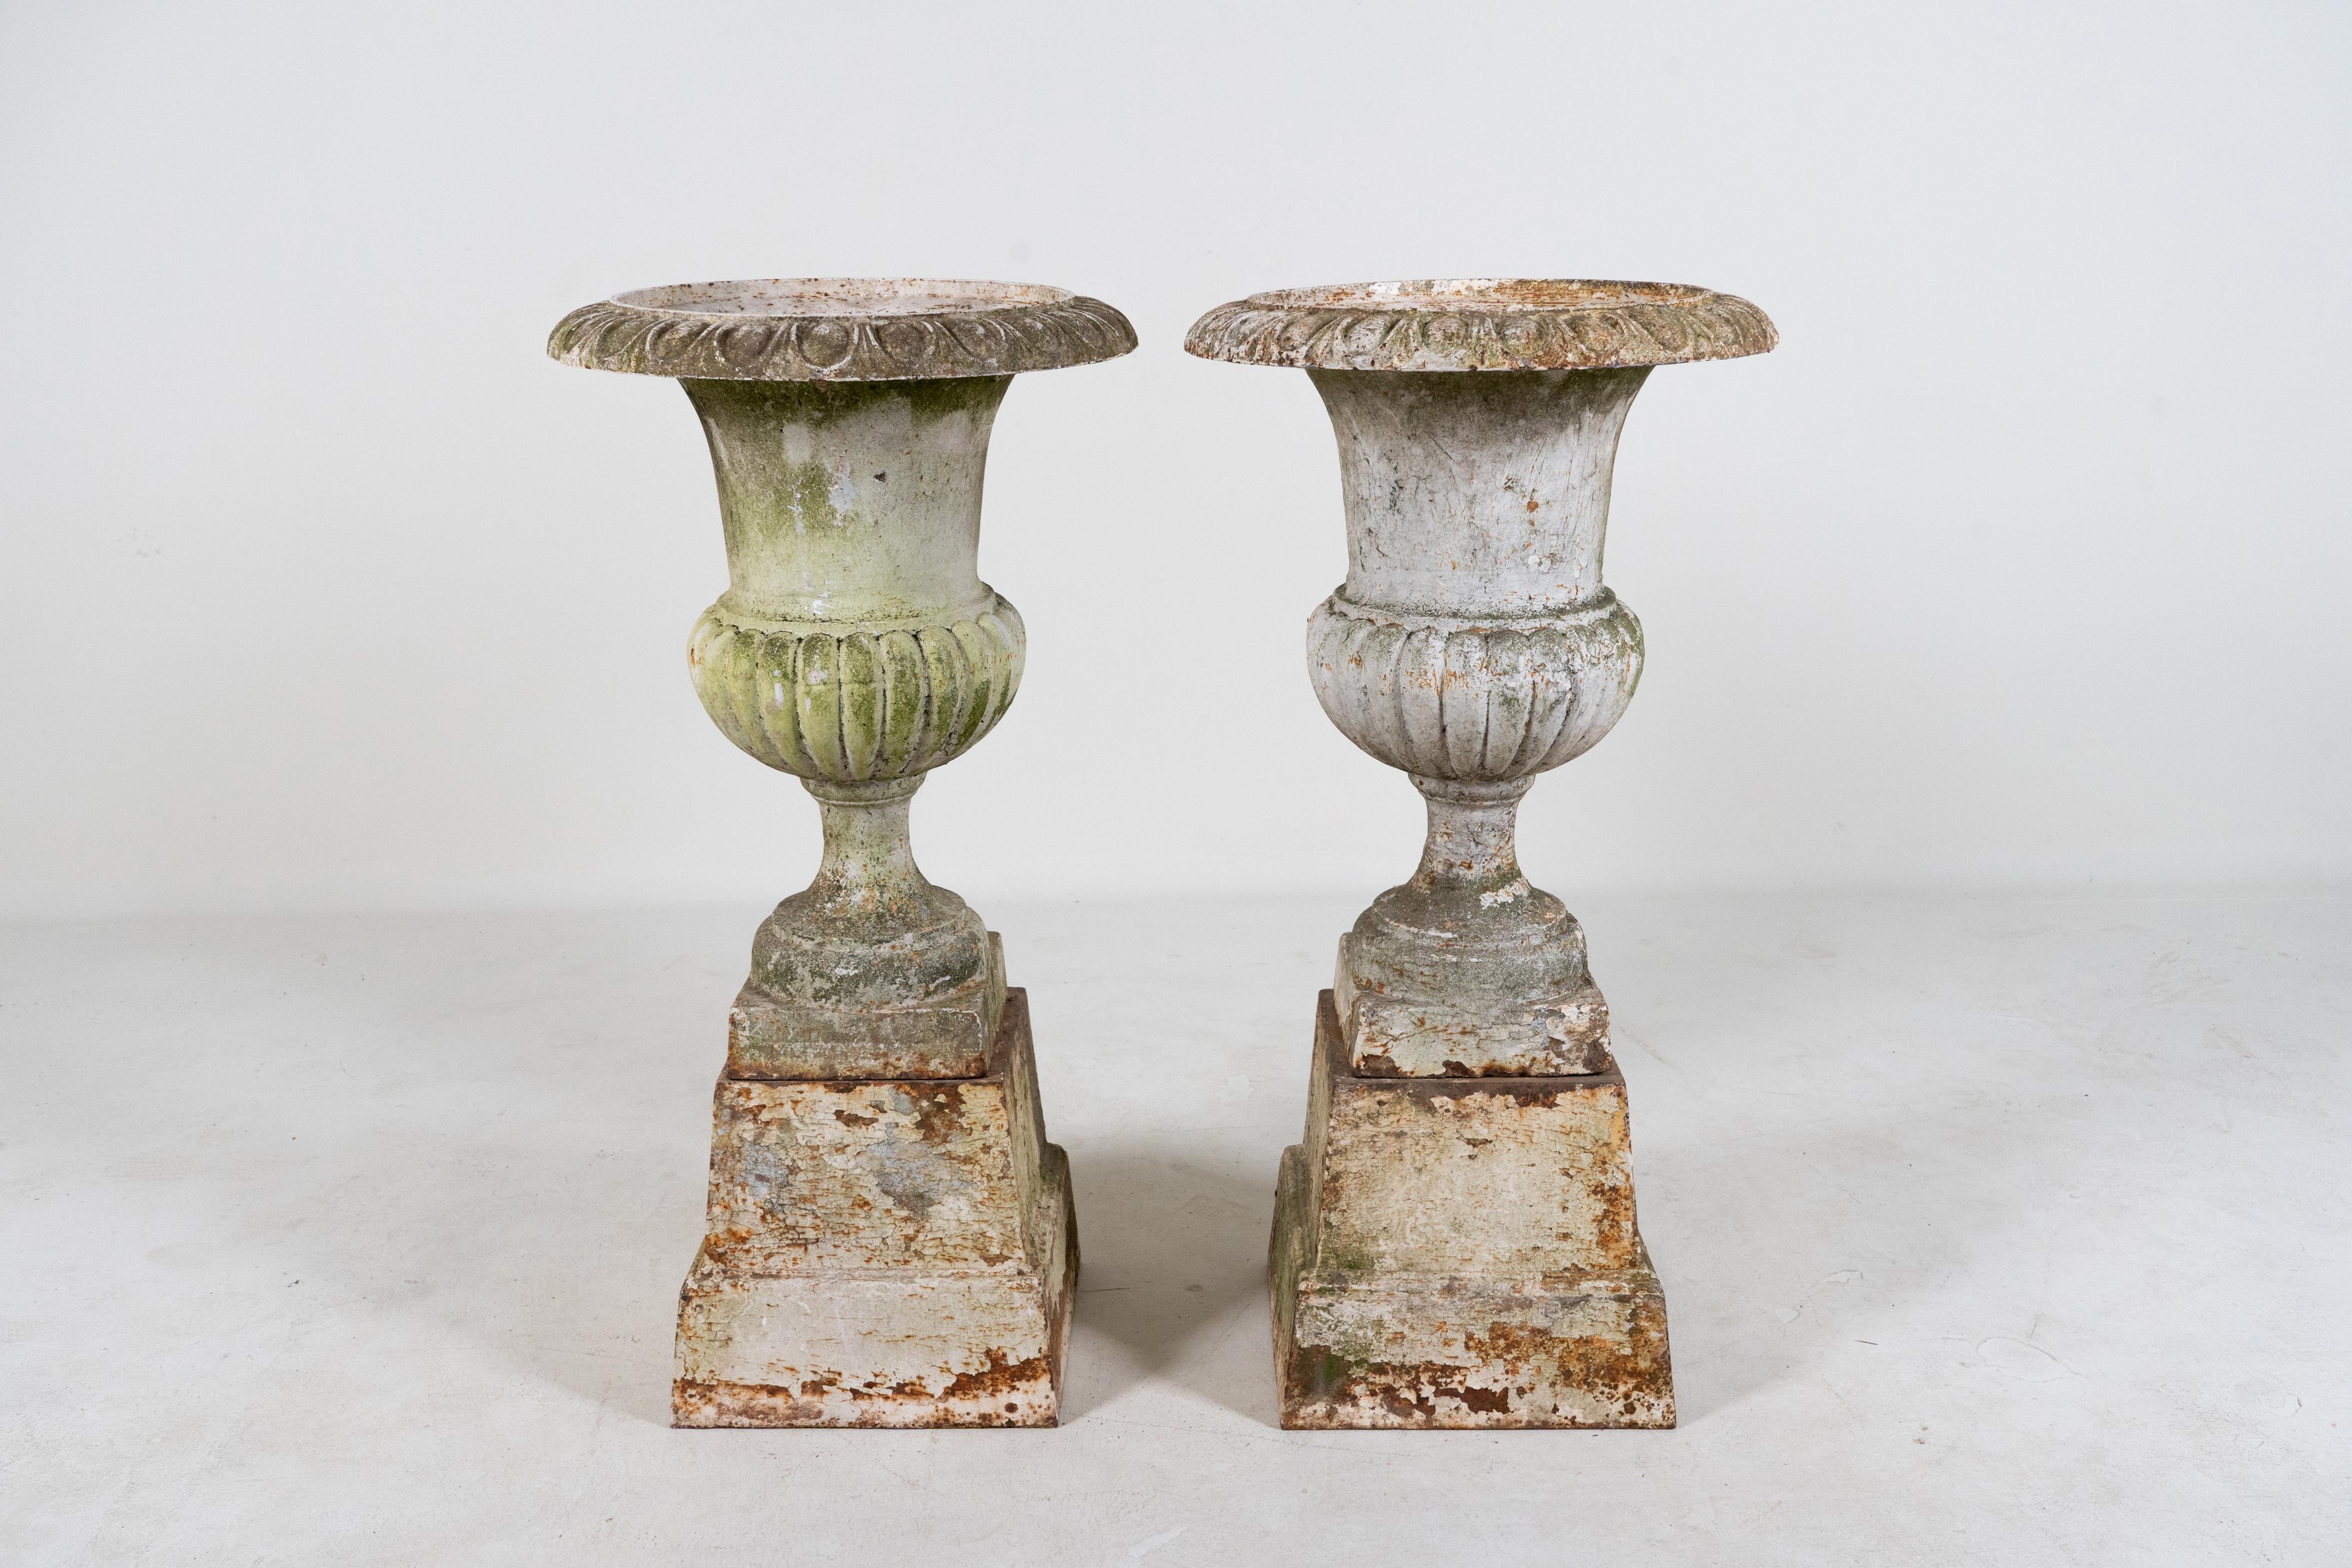 A superb pair of antique French cast iron garden urn planters circa 1880. These elegant campana jardinieres are the quintessential classic French garden urns. Originally used outdoors, these can be used indoors as dramatic accessories to traditional